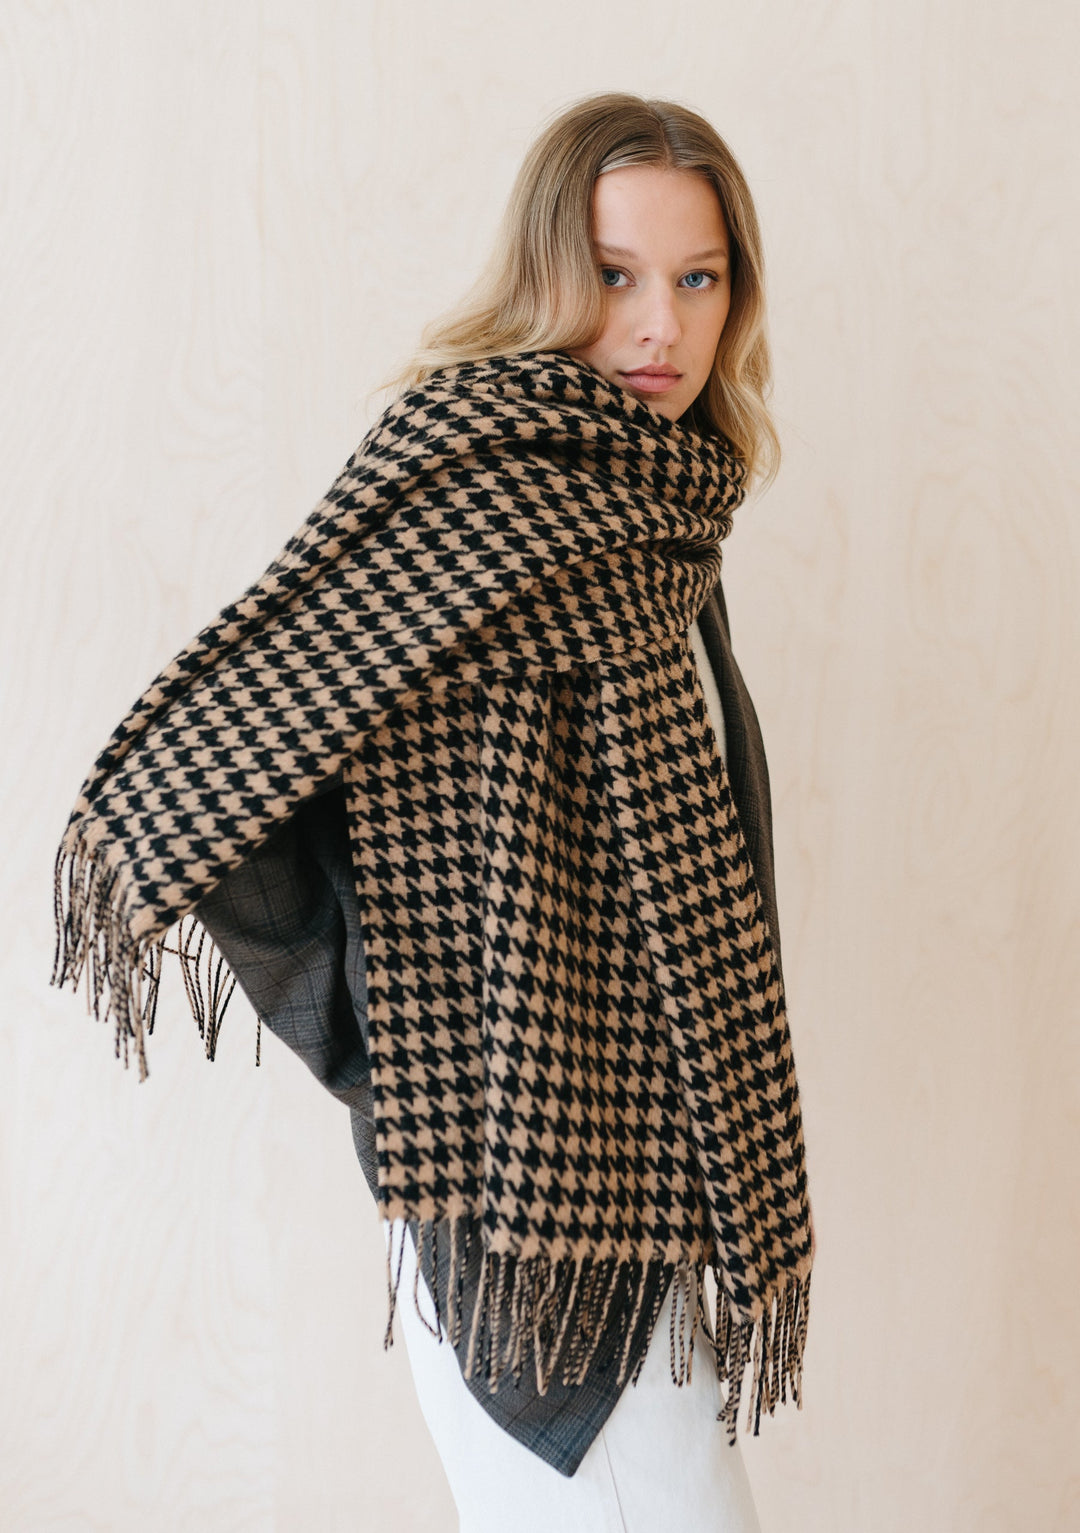 Lambswool Blanket Scarf in Camel Houndstooth